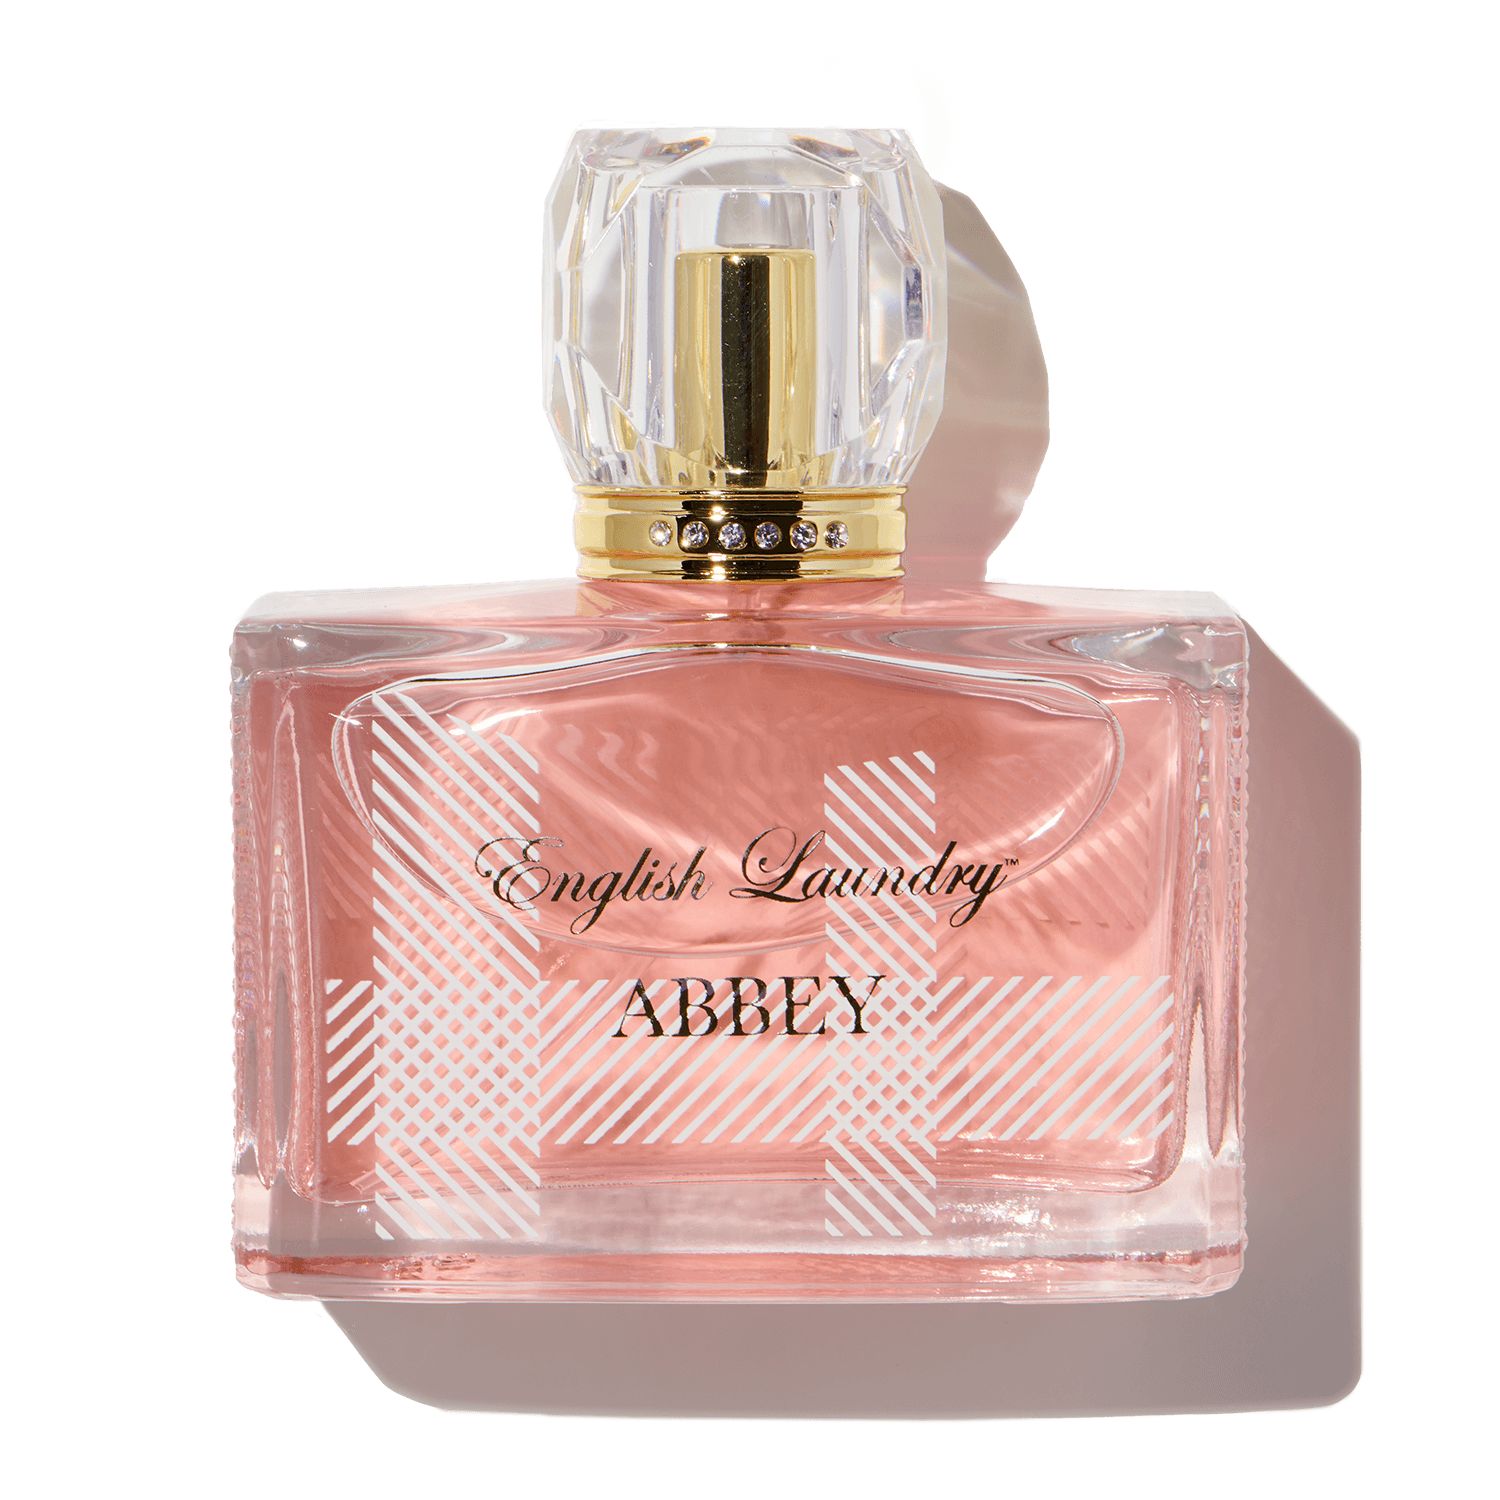 Buy English Laundry Abbey for $16.95 at Scentbird